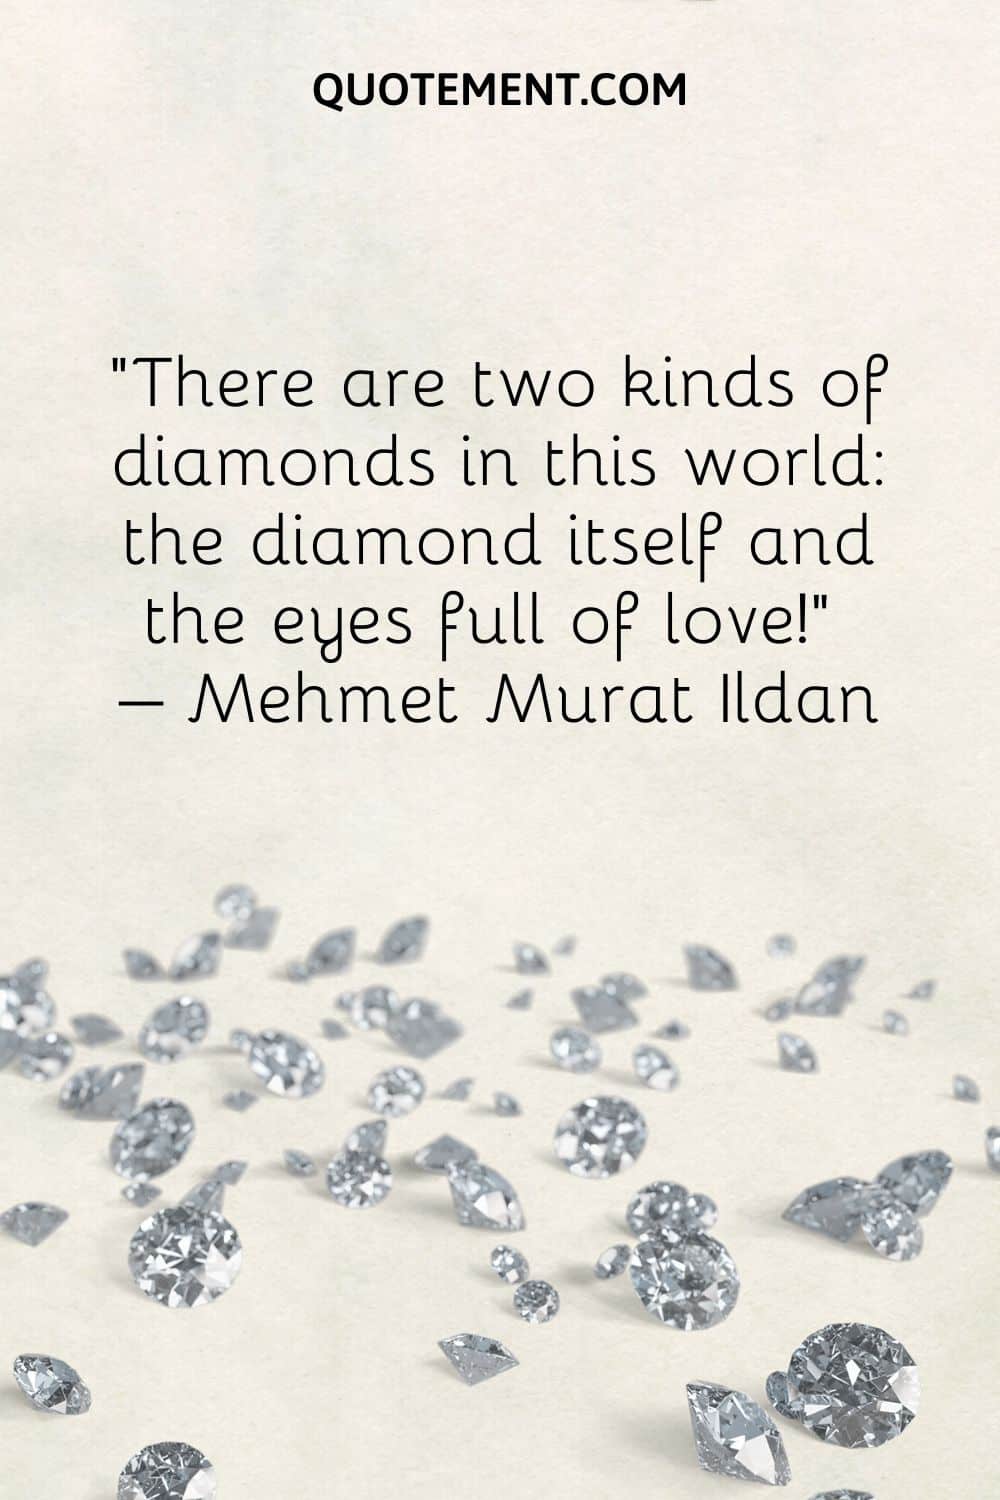 There are two kinds of diamonds in this world